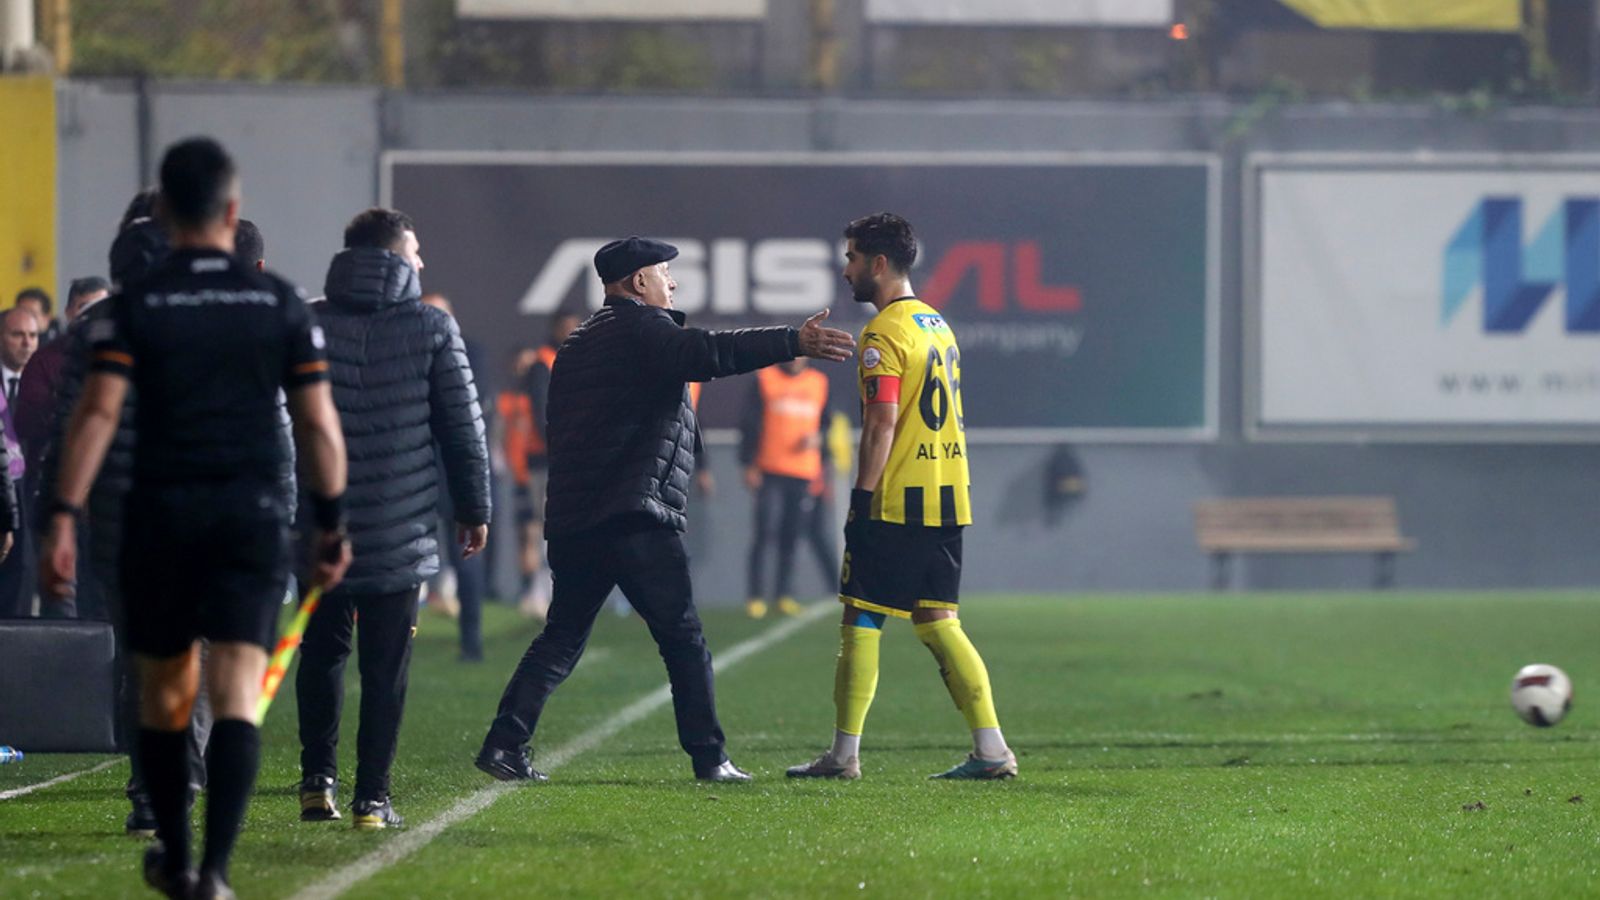 Turkish side Istanbulspor leaves pitch after not being awarded a penalty - eight days after referee was punched in the face - Sky News